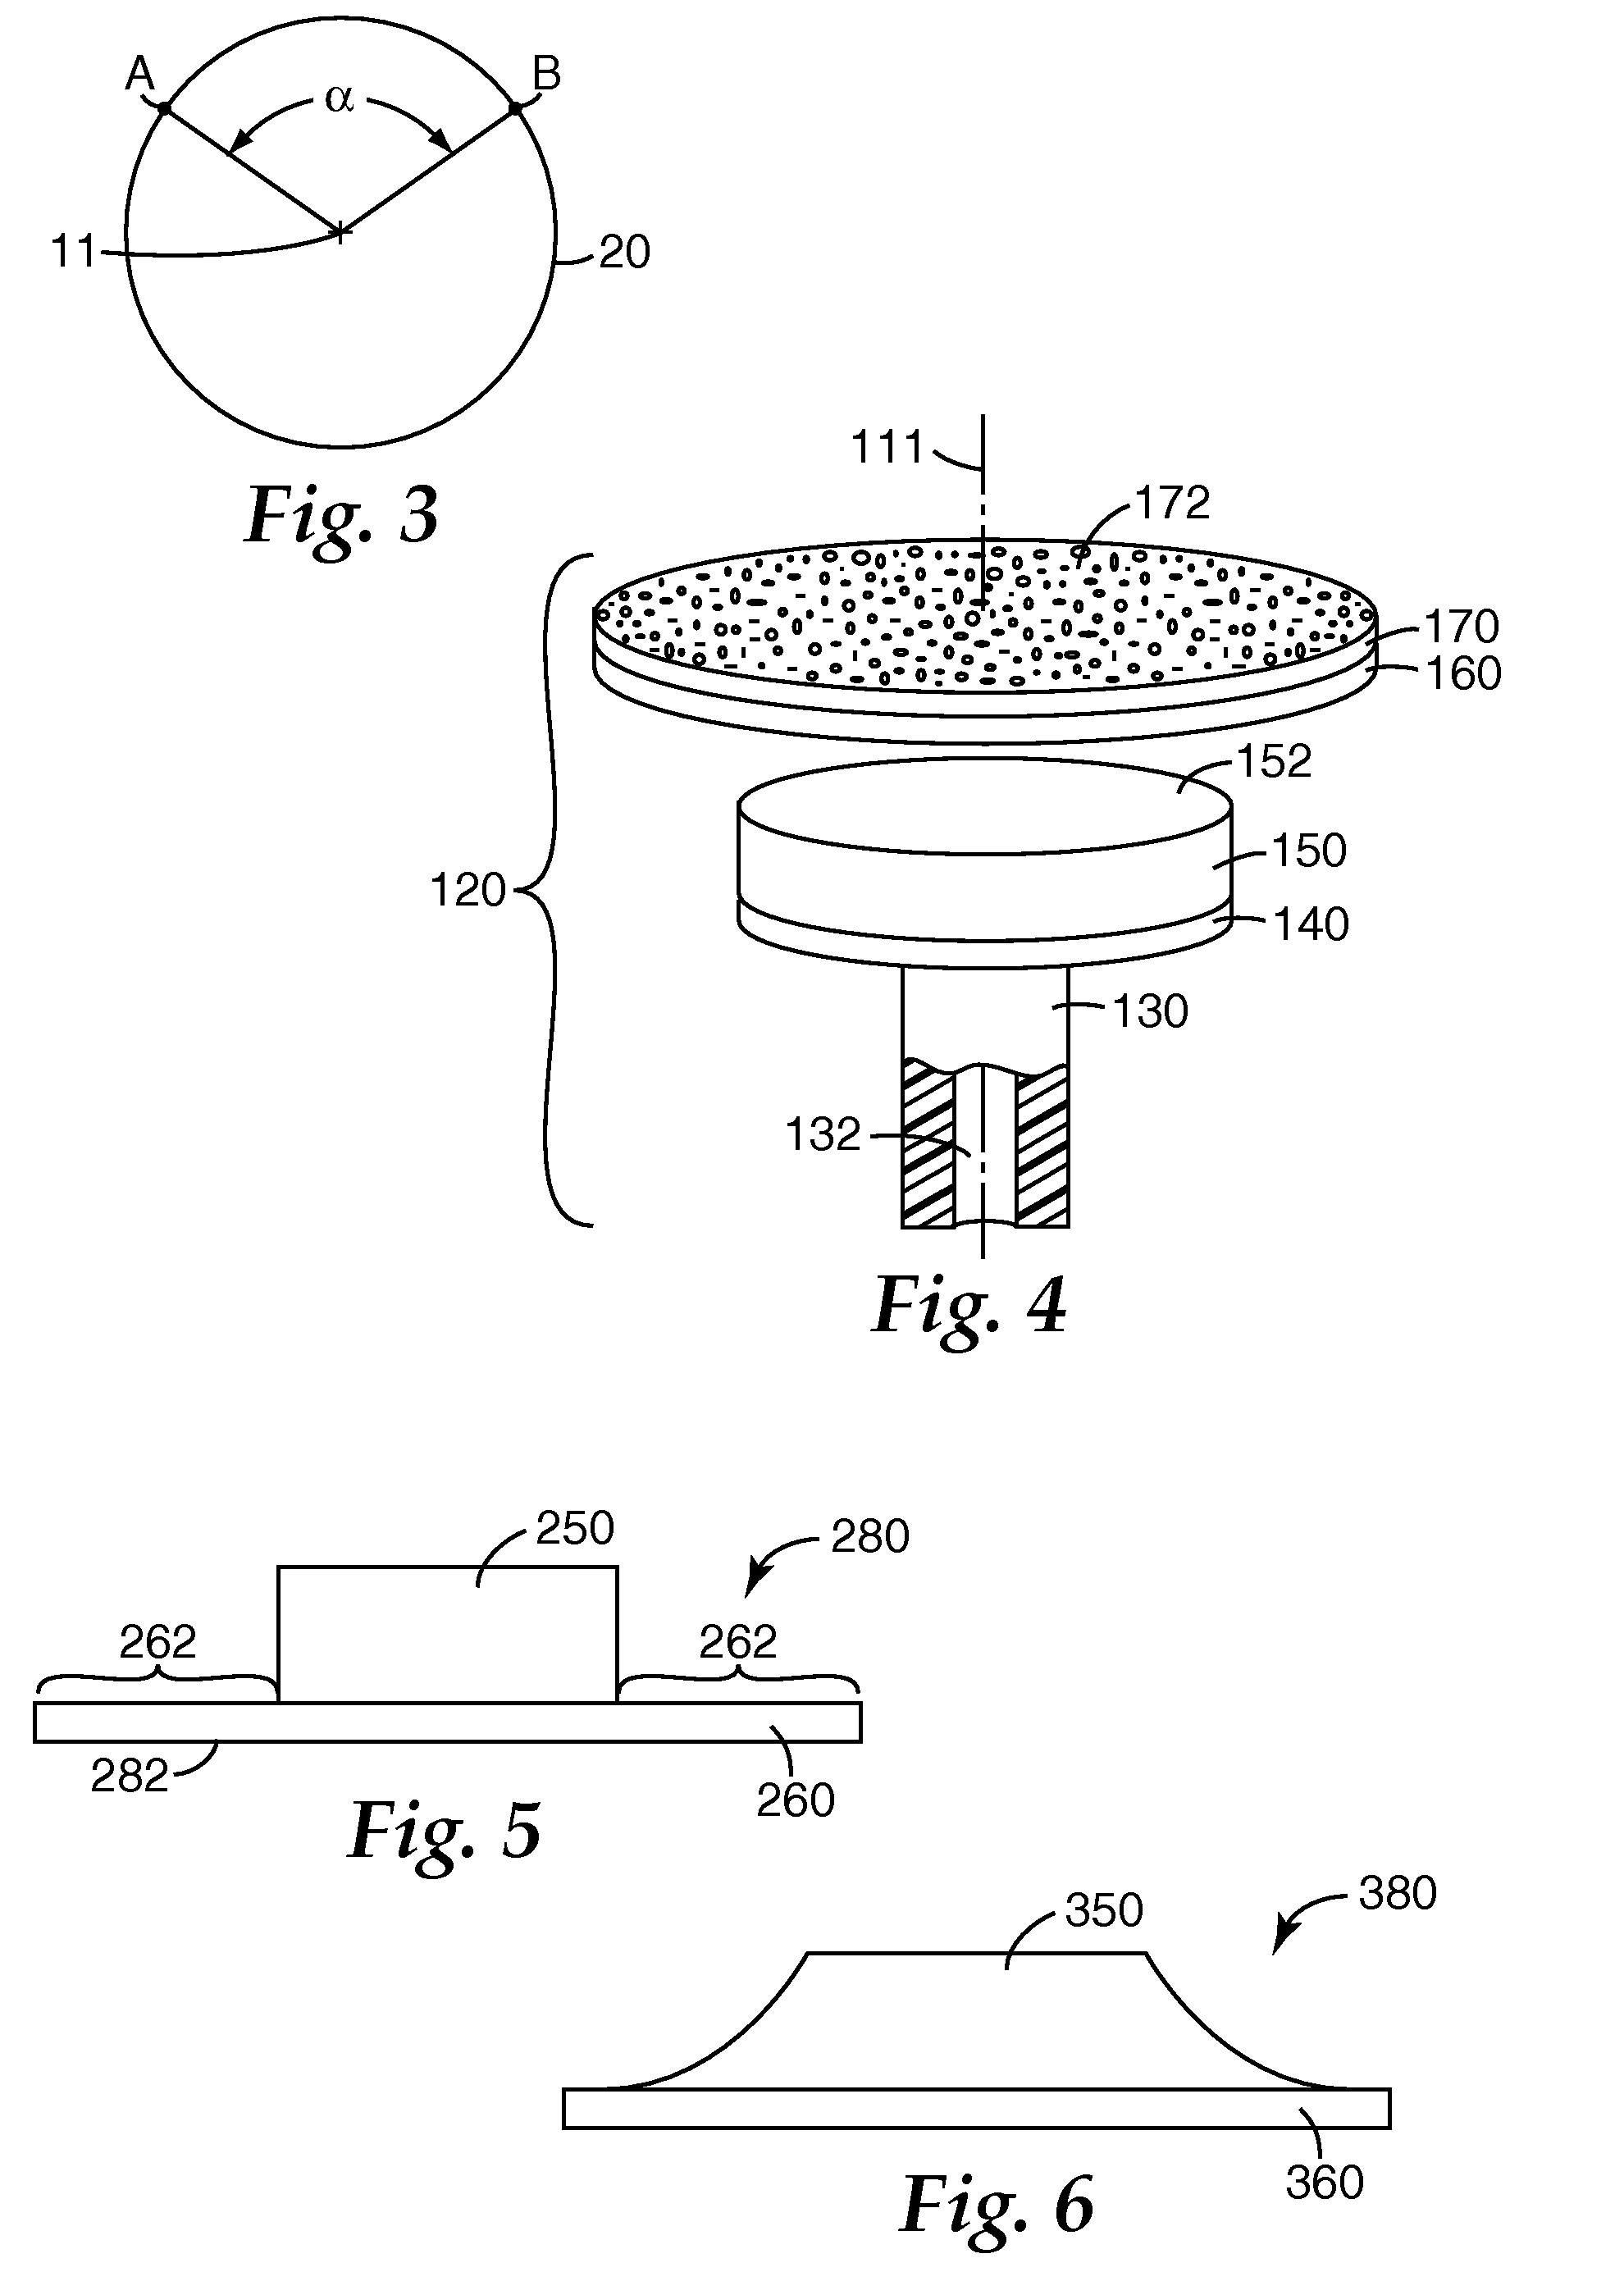 Abrasive articles, rotationally reciprocating tools, and methods